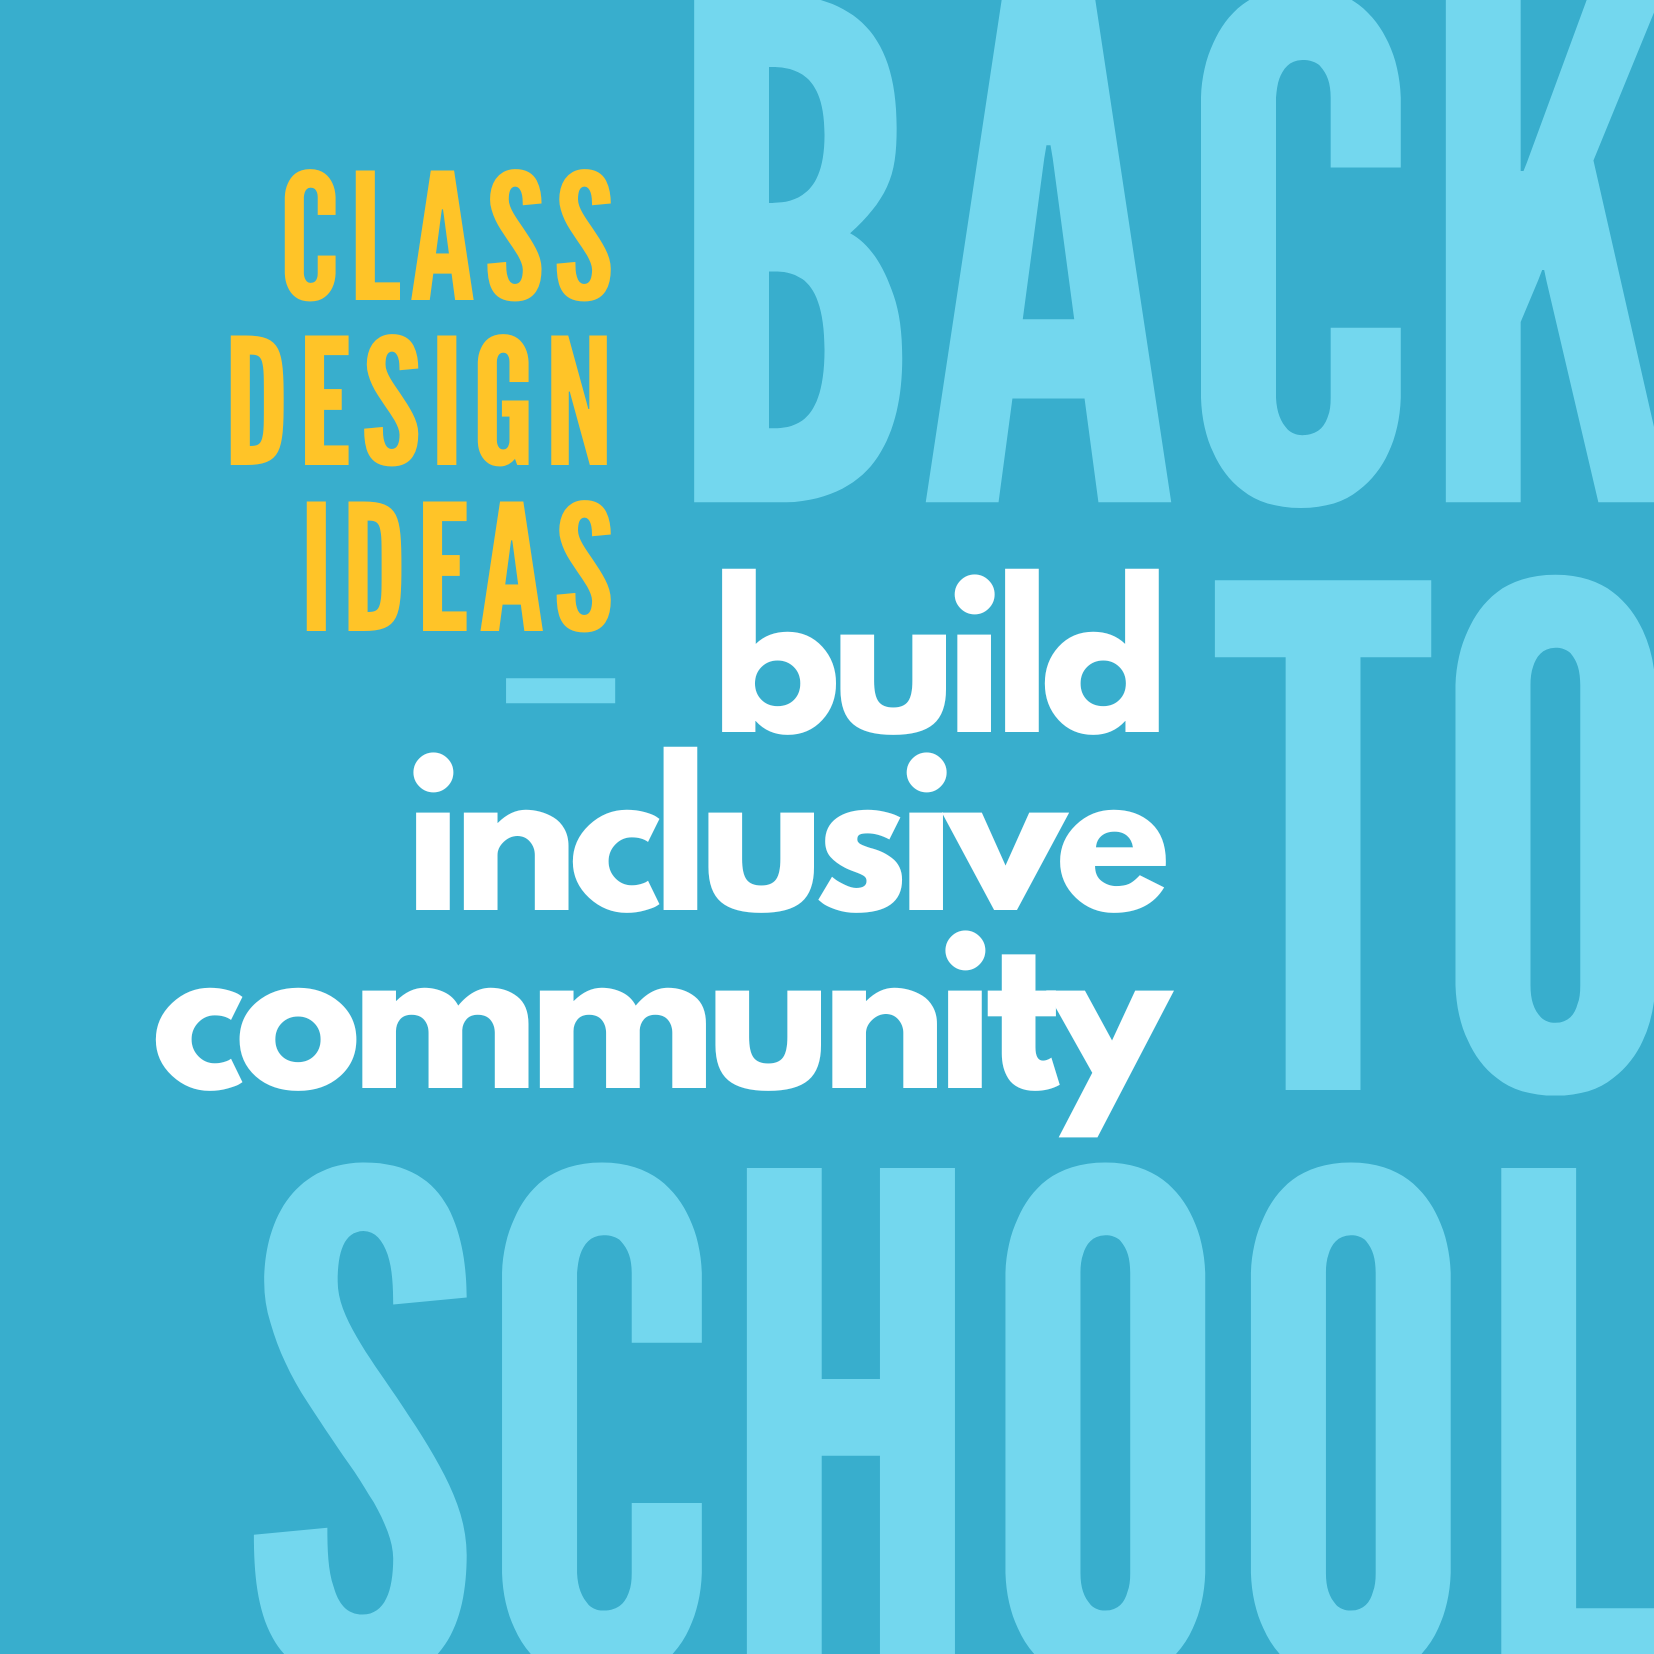 graphic reads in blue letters Back to School, white letters Build Inclusive Community, yellow letters class design ideas